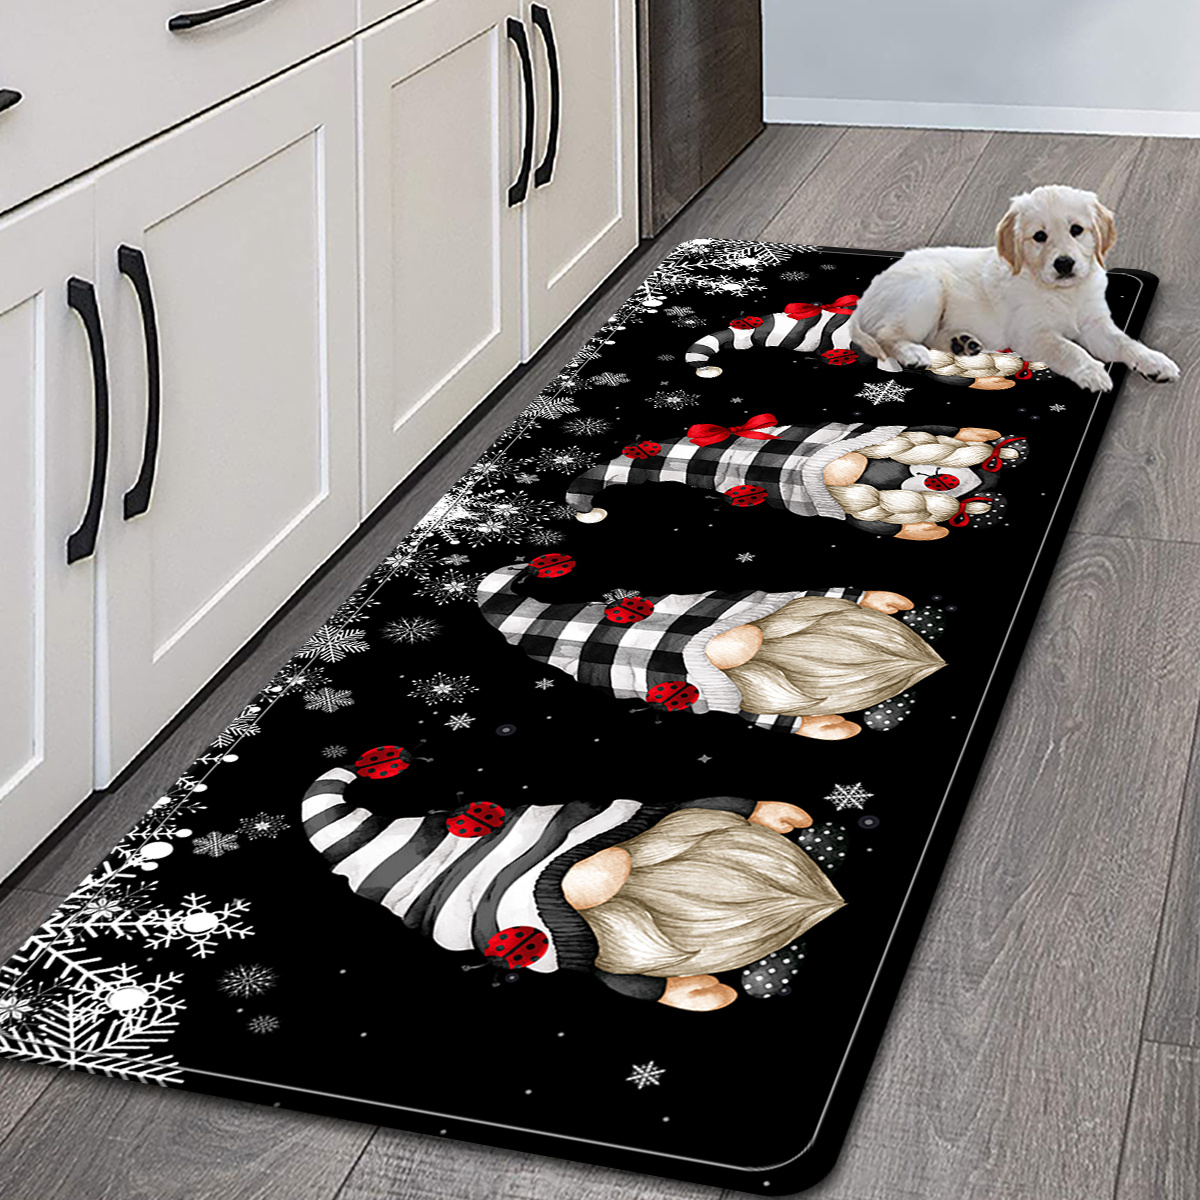 

1pc Black And White Gnome Crystal Bath Mat Rugs Carpet Floor Mat Santa Claus Pattern Waterproof And Easy To Clean Seasonal Decoration Home Decoration Cute Aesthetic Room Decor Art Supplies Home Decor